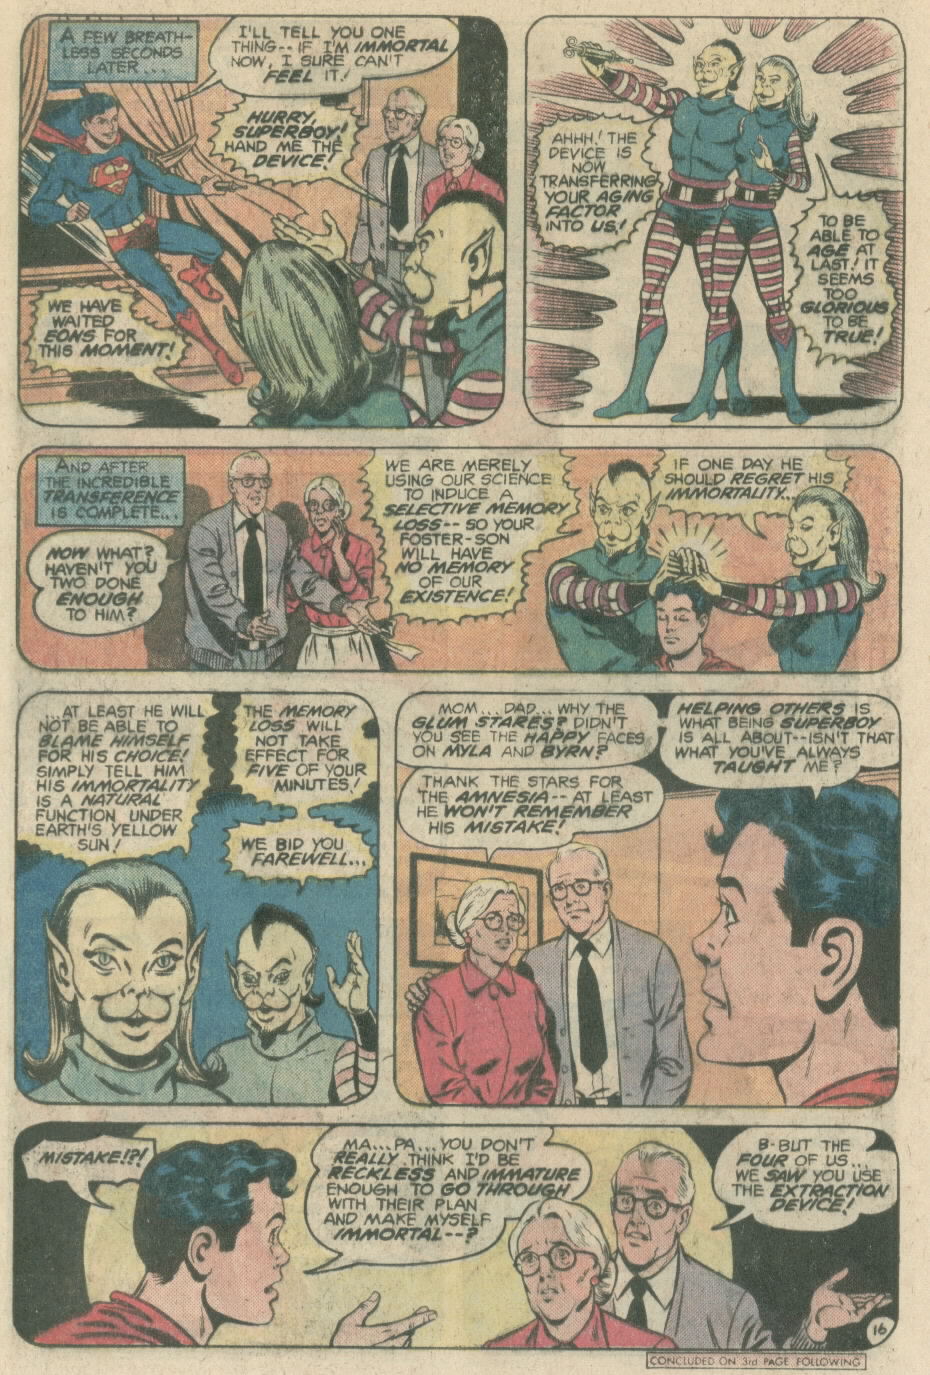 The New Adventures of Superboy 1 Page 16